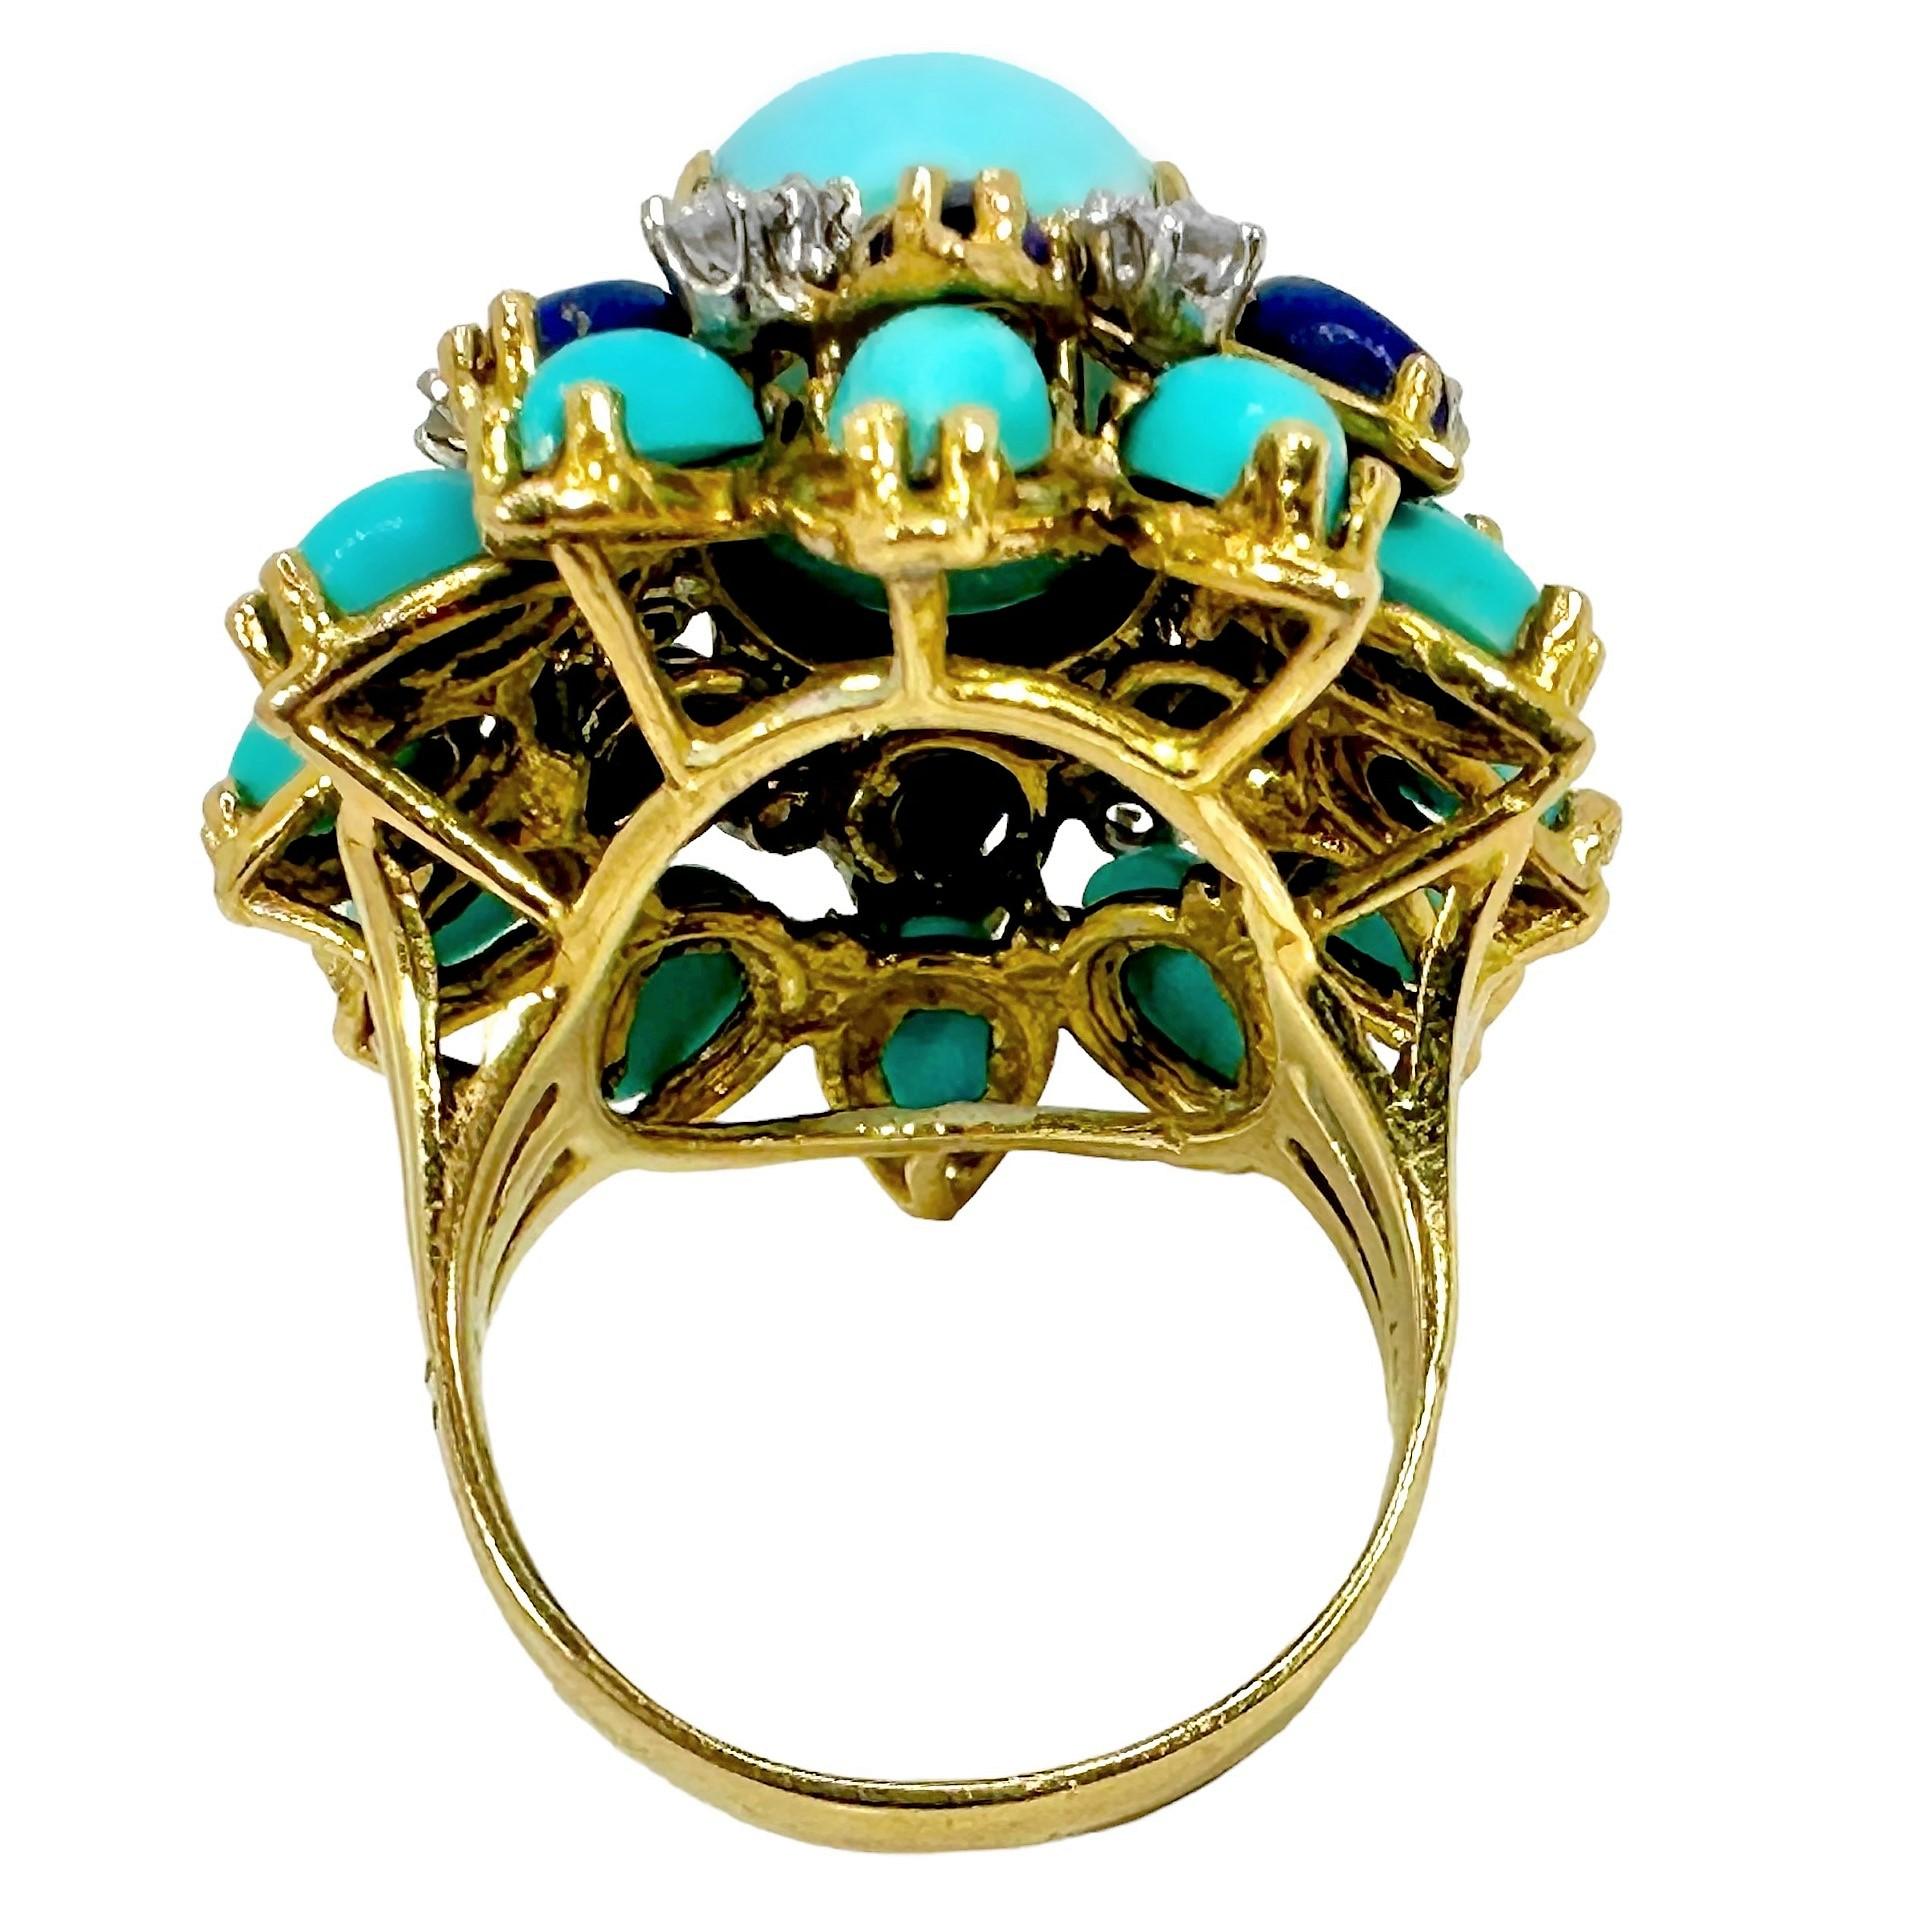 Brilliant Cut 1960s Big, Bold, Yellow Gold, Turquoise, Lapis-Lazuli and Diamond Cocktail Ring